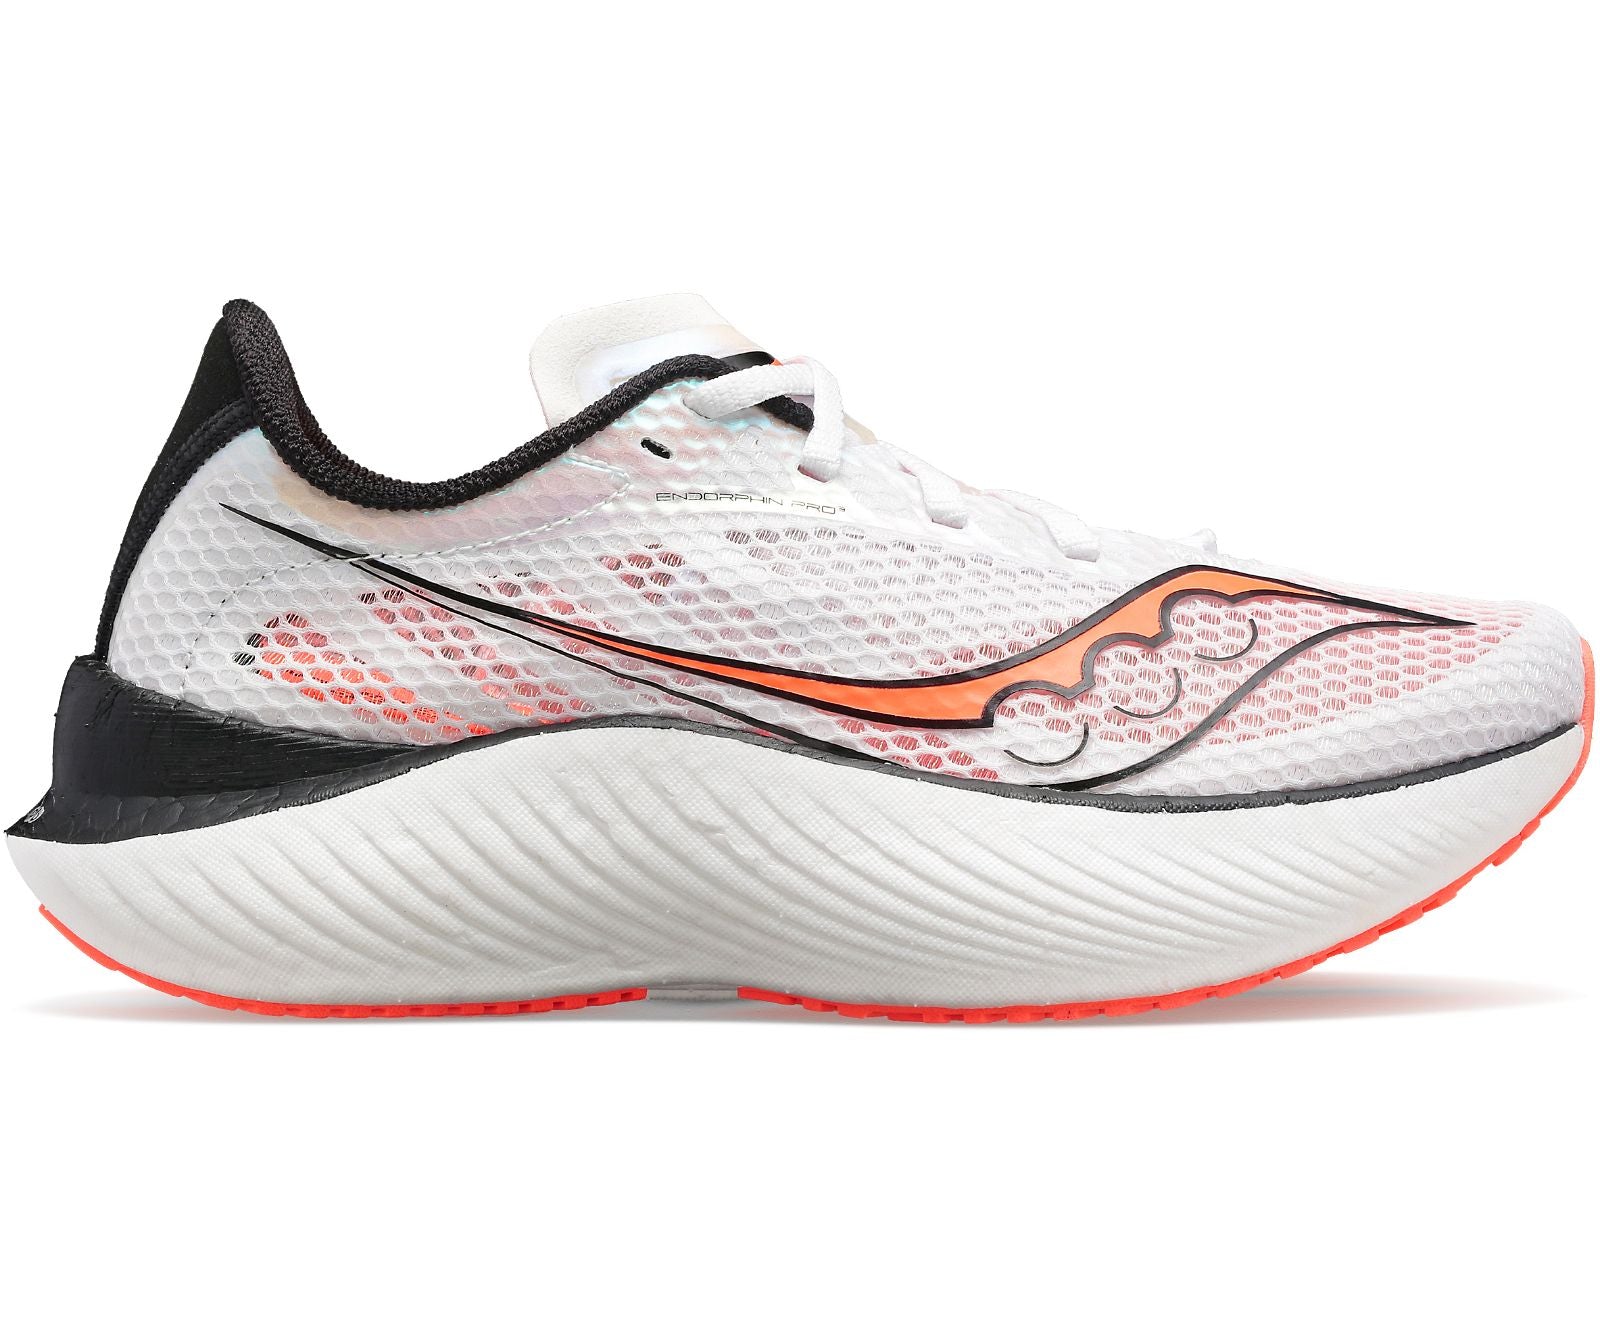 Where to Buy Saucony Running Shoes in Los Angeles?